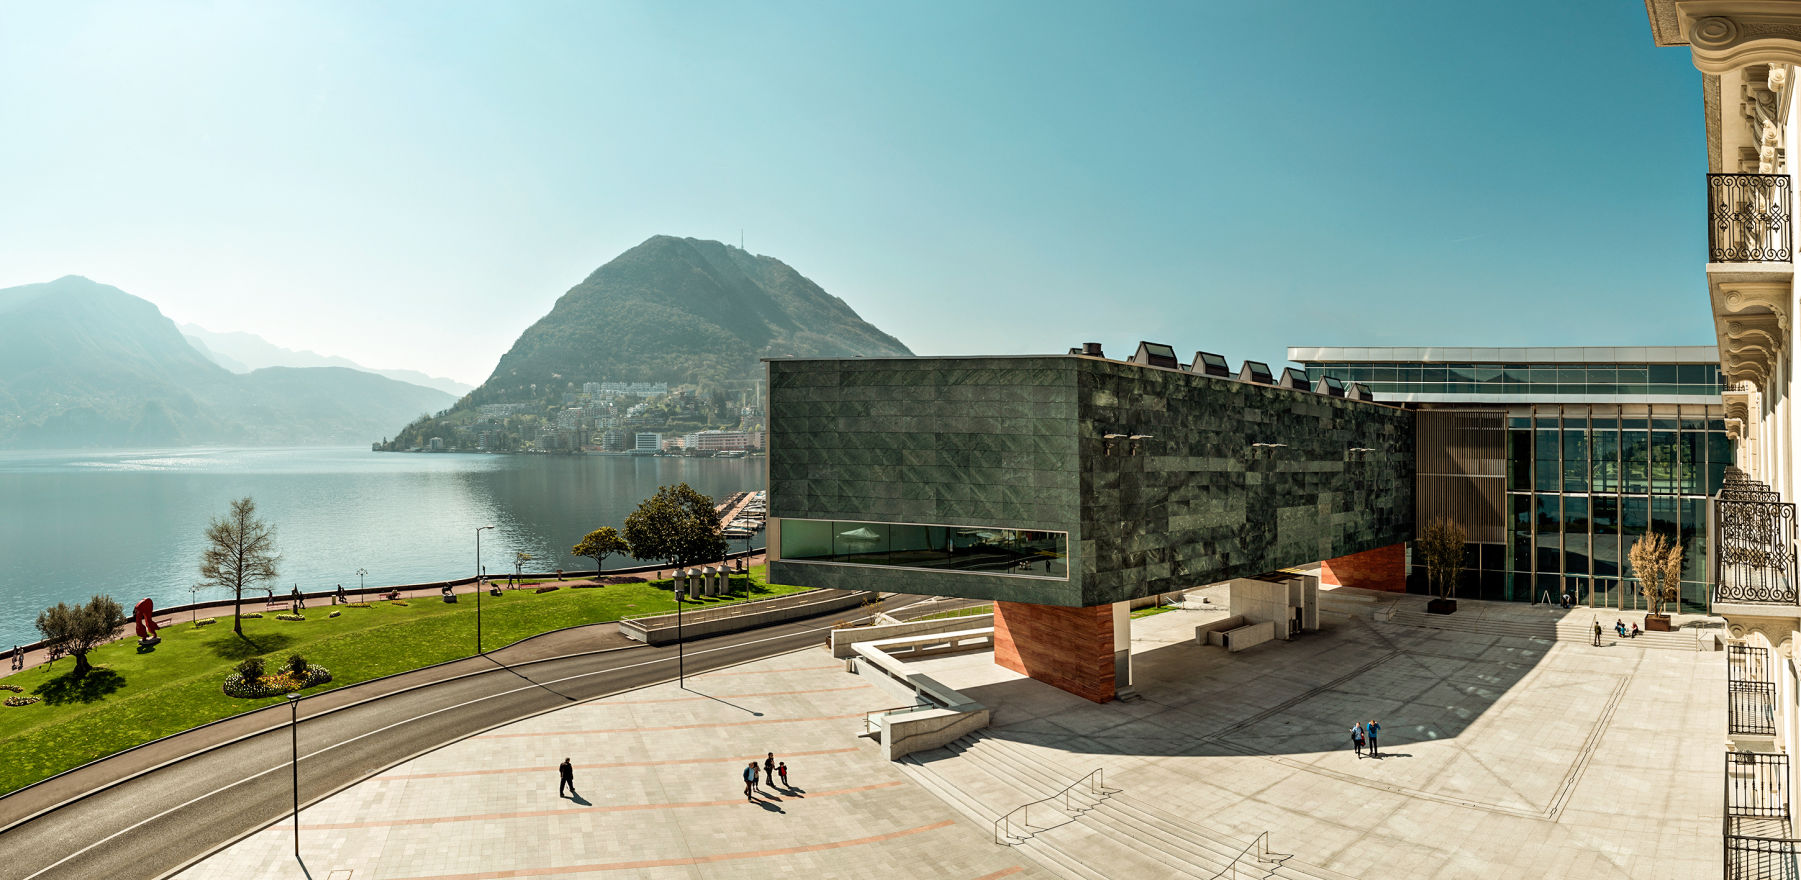 Sunny view from the Lugano Arte e Cultura building and the lanscape behind